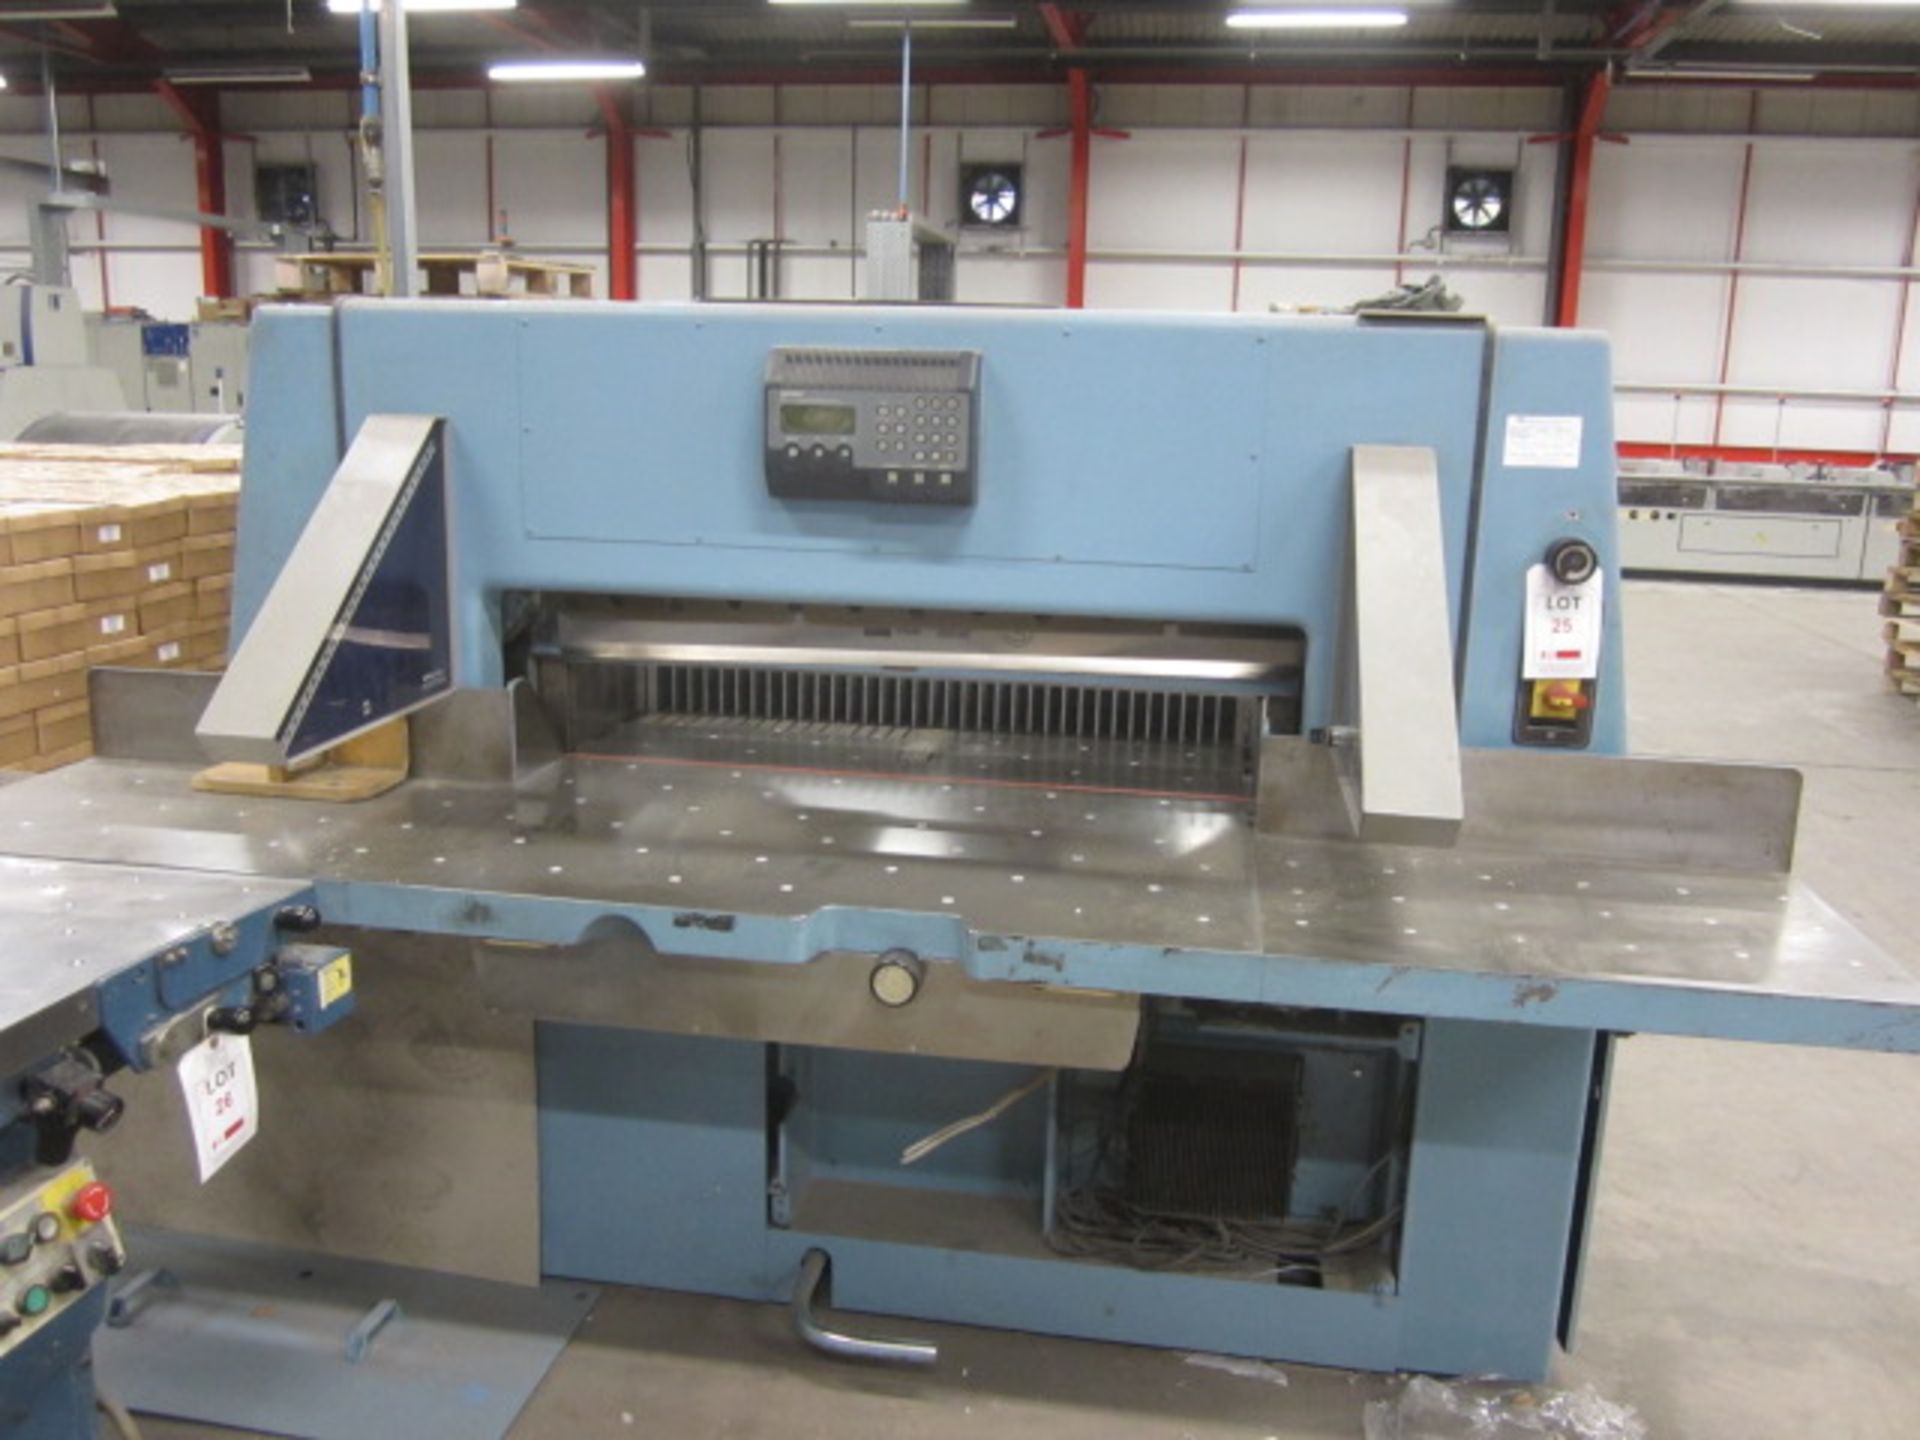 Wohlenberg 115 paper guillotine with air table, serial no. 3217-032, 3135.00.8012-00, max cut